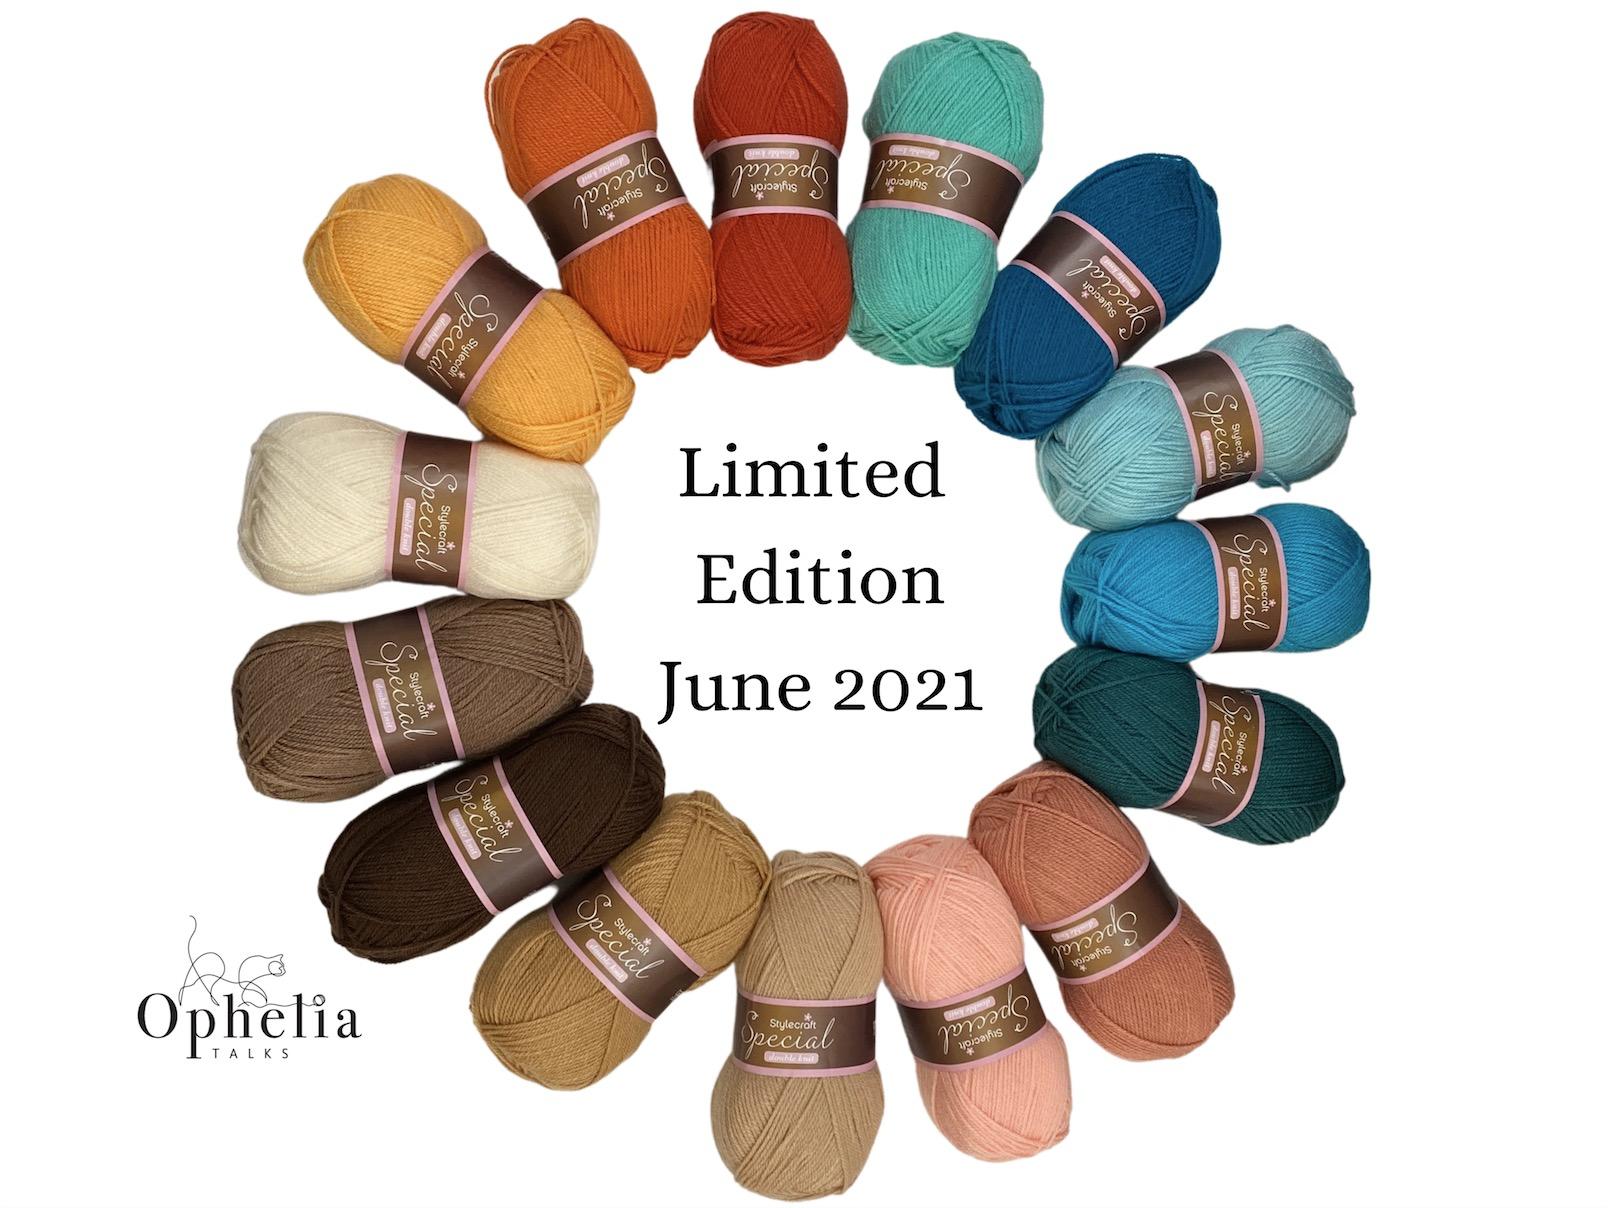 StyleCraft Special DK June 2021 Limited Edition Colour pack in circle view